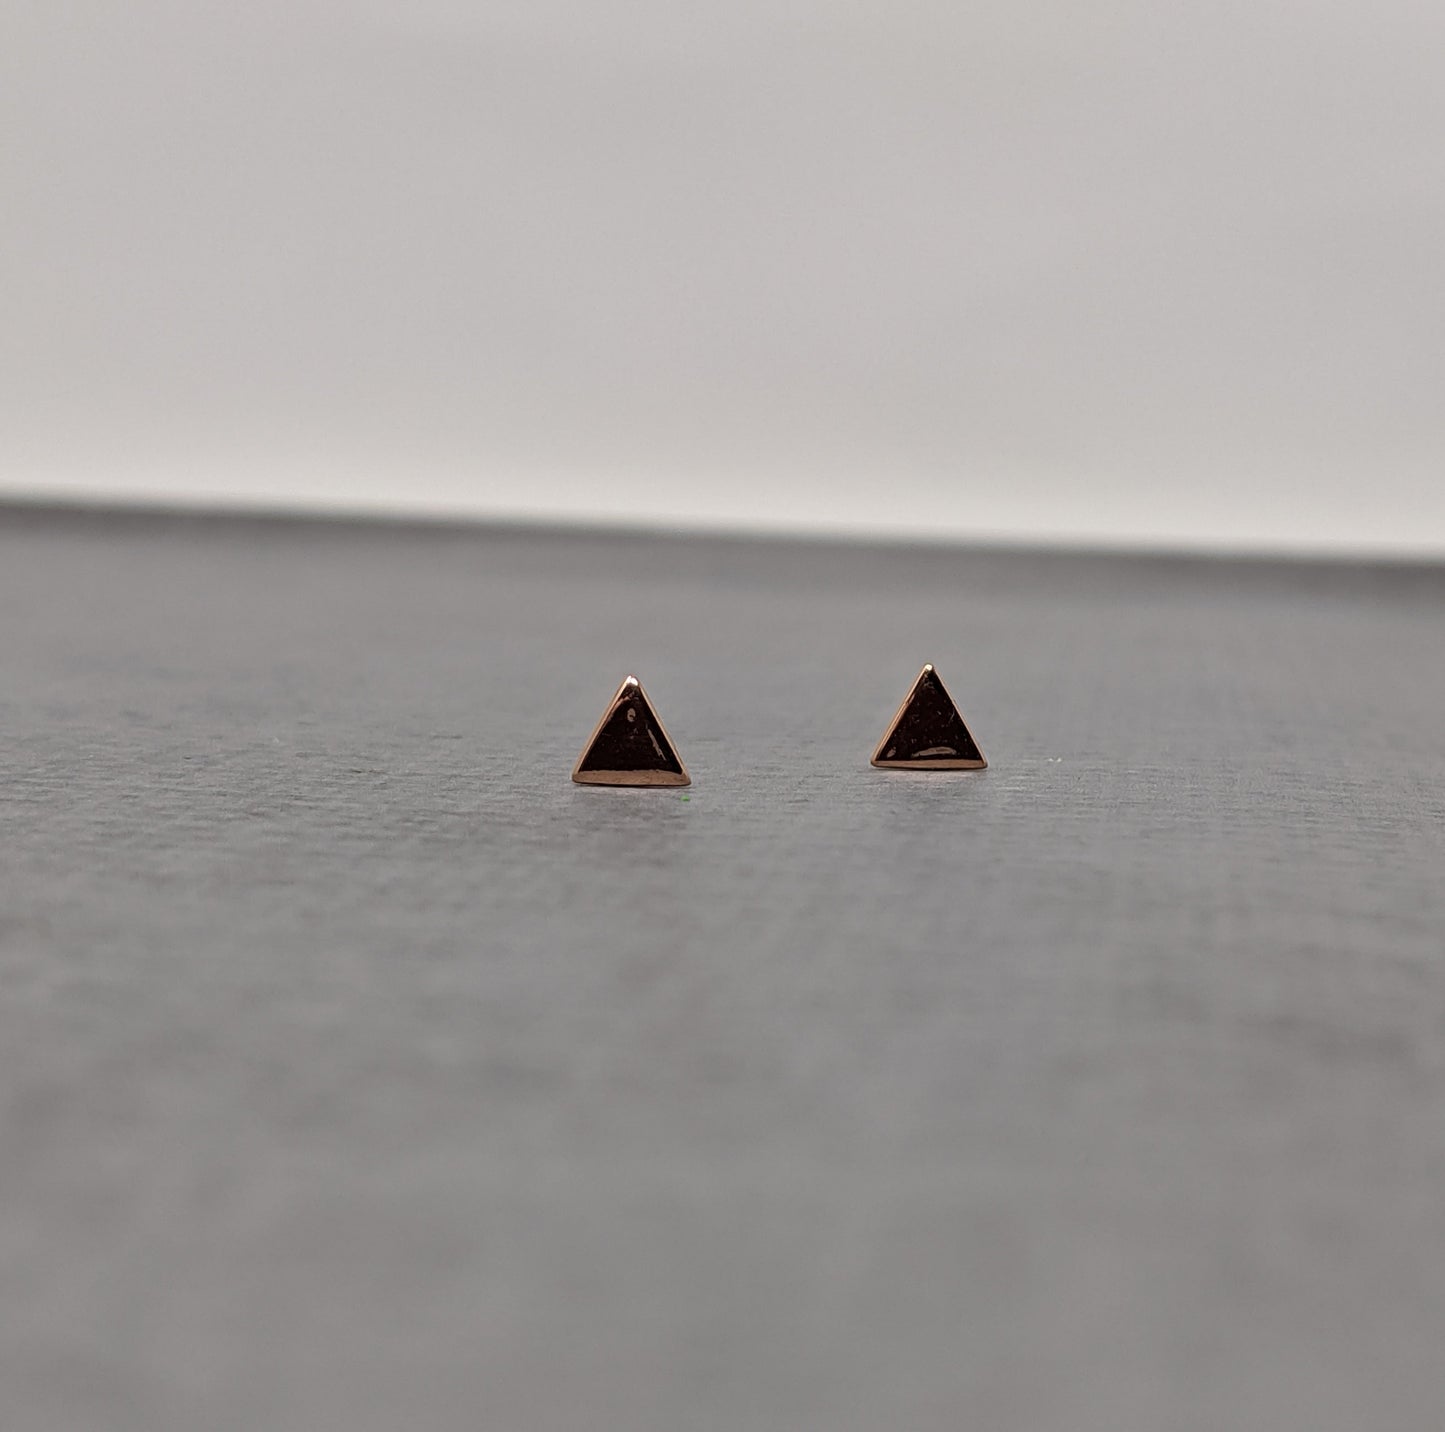 rose gold triangle stud earrings